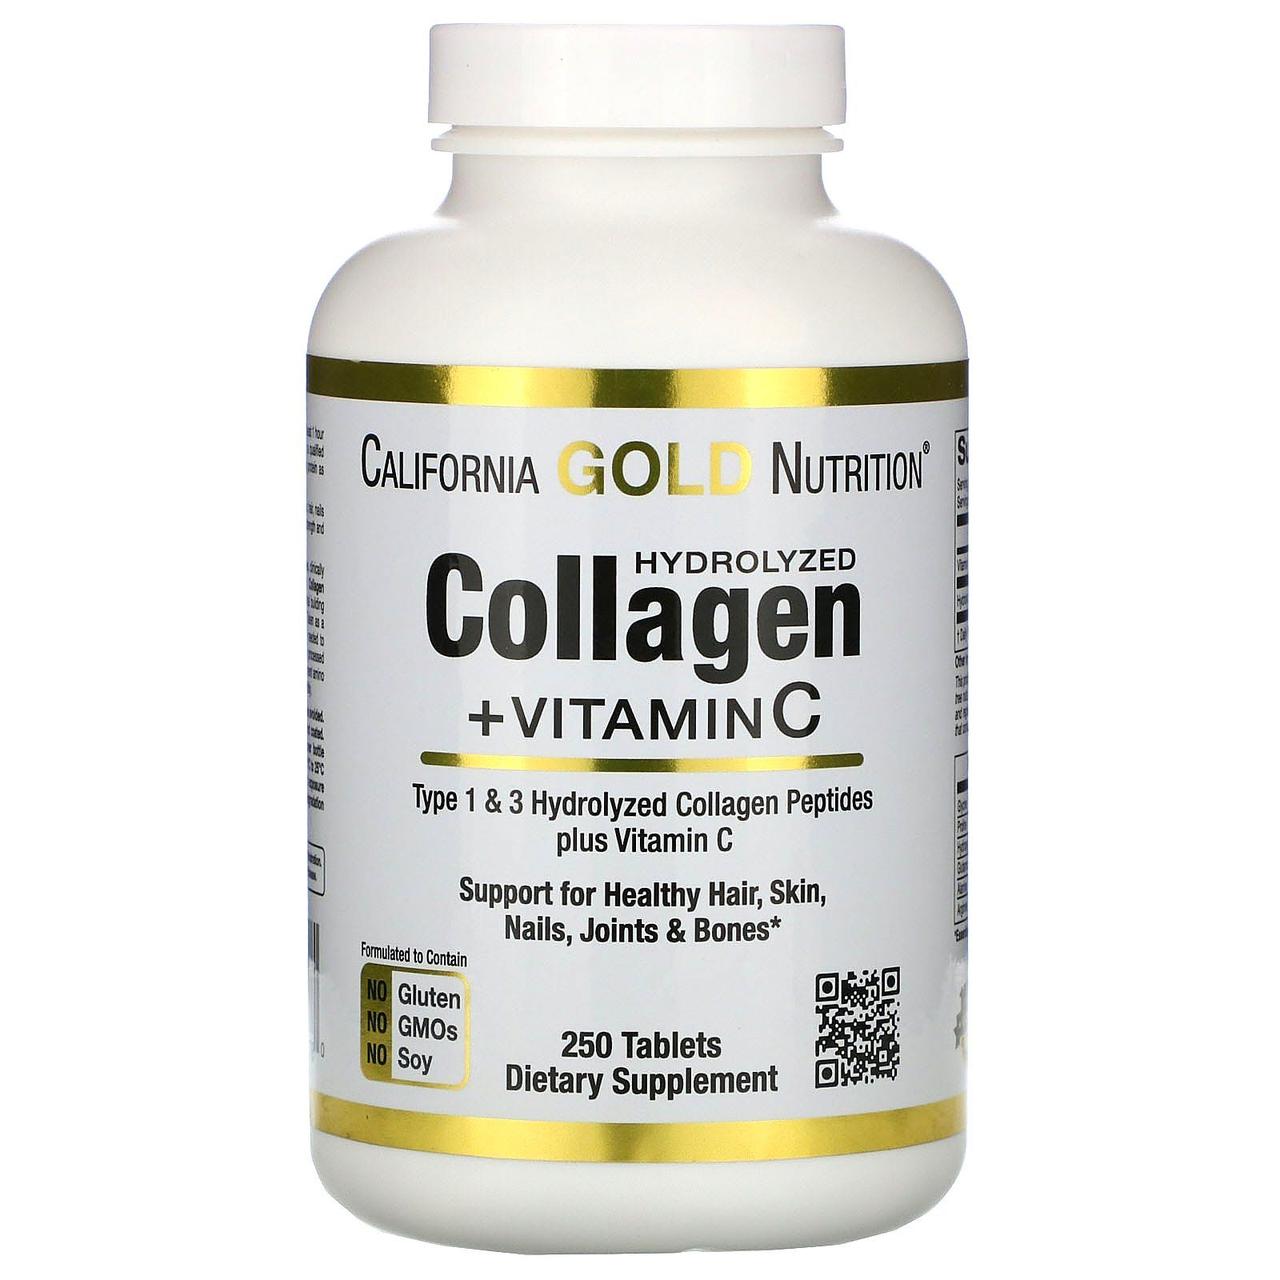 California Gold Nutrition Hydrolyzed Collagen Peptides + Vitamin C, Type 1 & 3, 250 Tabs,  ml, California Gold Nutrition. Colágeno. General Health Ligament and Joint strengthening Skin health 